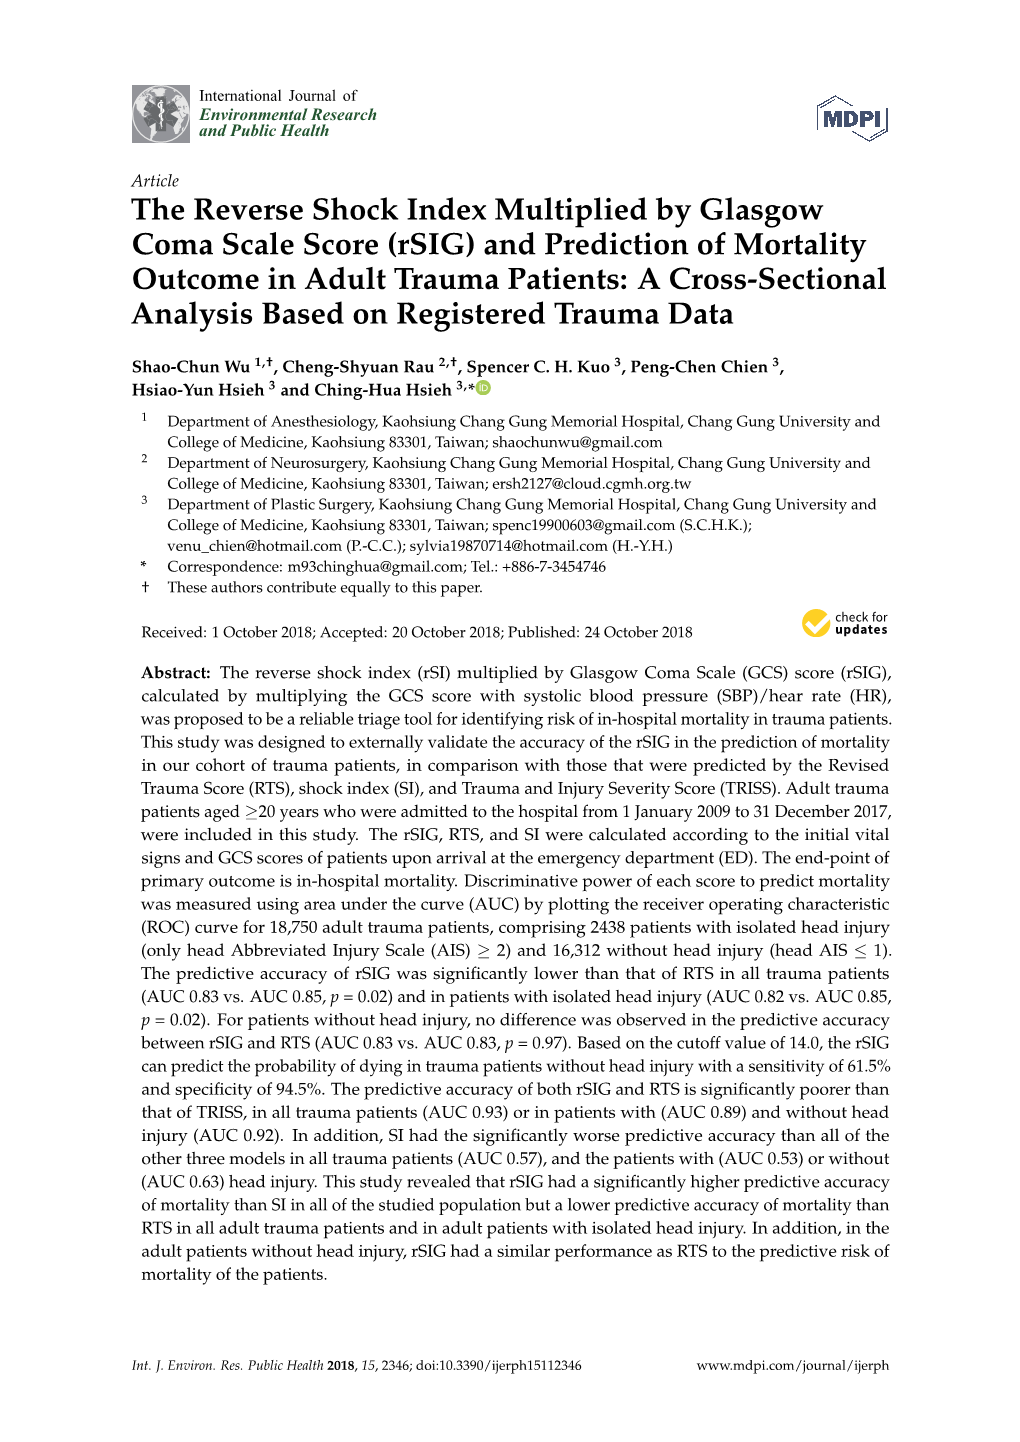 The Reverse Shock Index Multiplied by Glasgow Coma Scale Score (Rsig) and Prediction of Mortality Outcome in Adult Trauma Patien